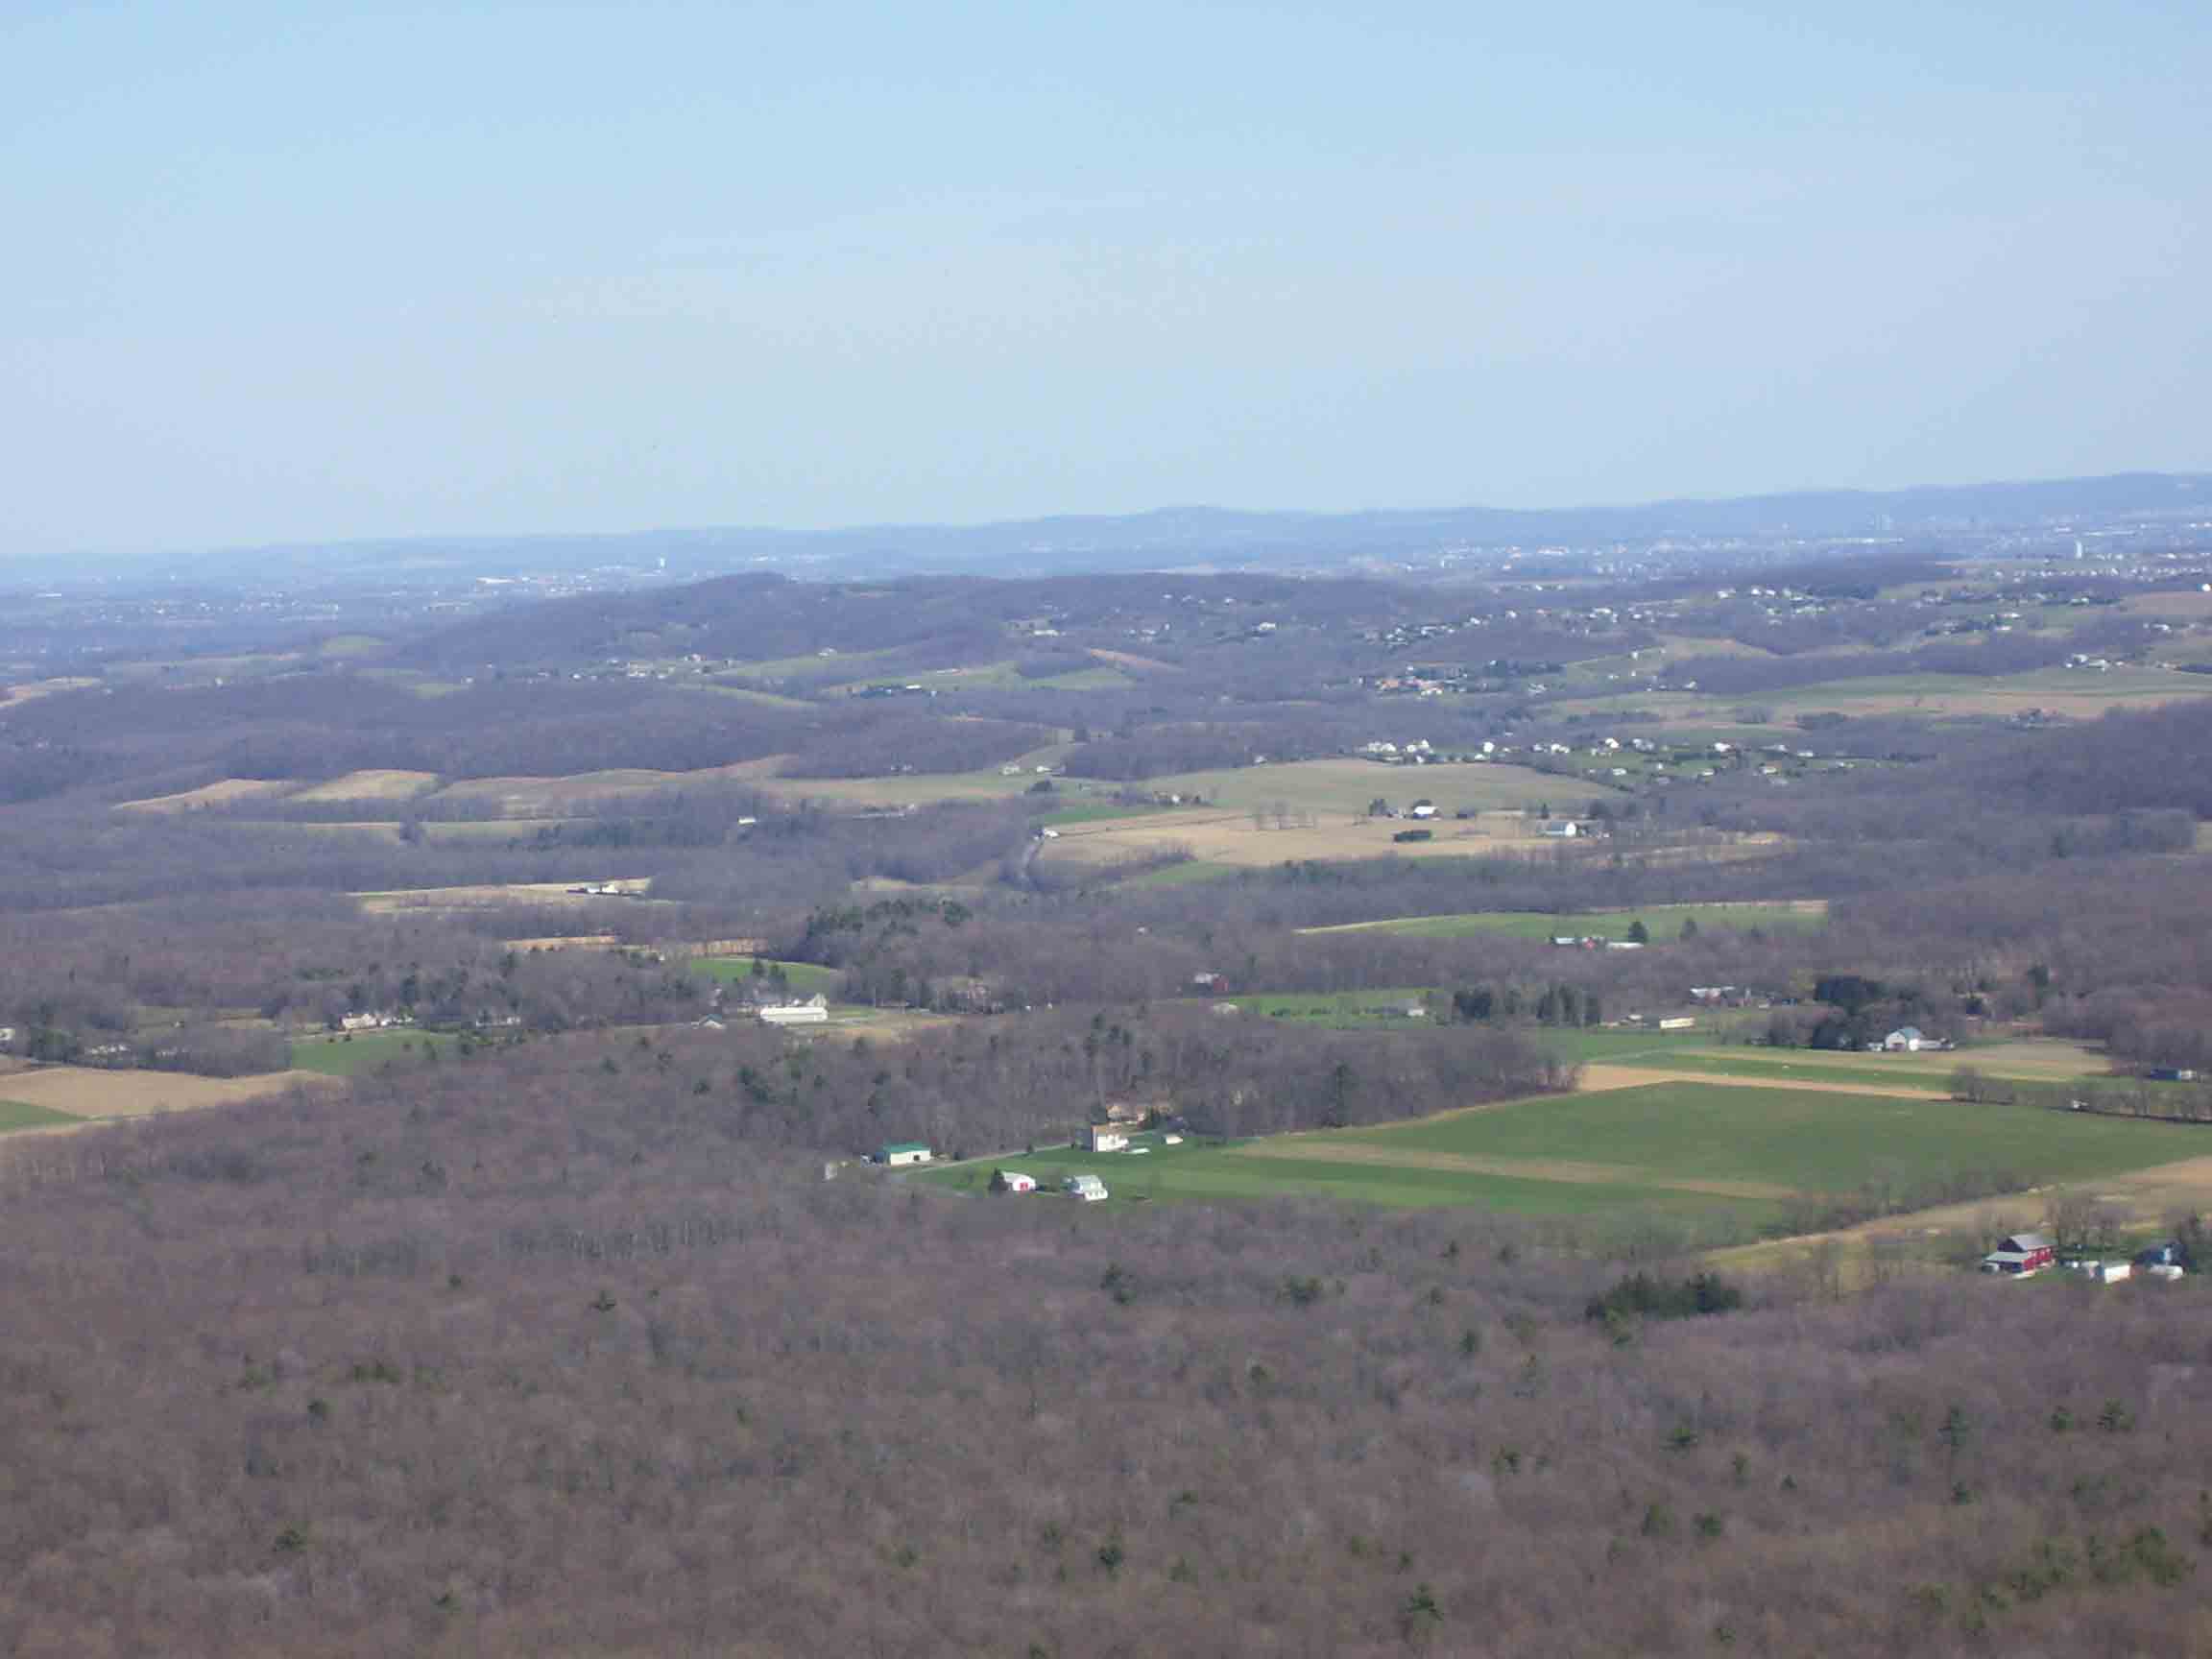 mm 8.0 - More expansive view to south from Bake Oven Knob.  Courtesy dlcul@conncoll.edu